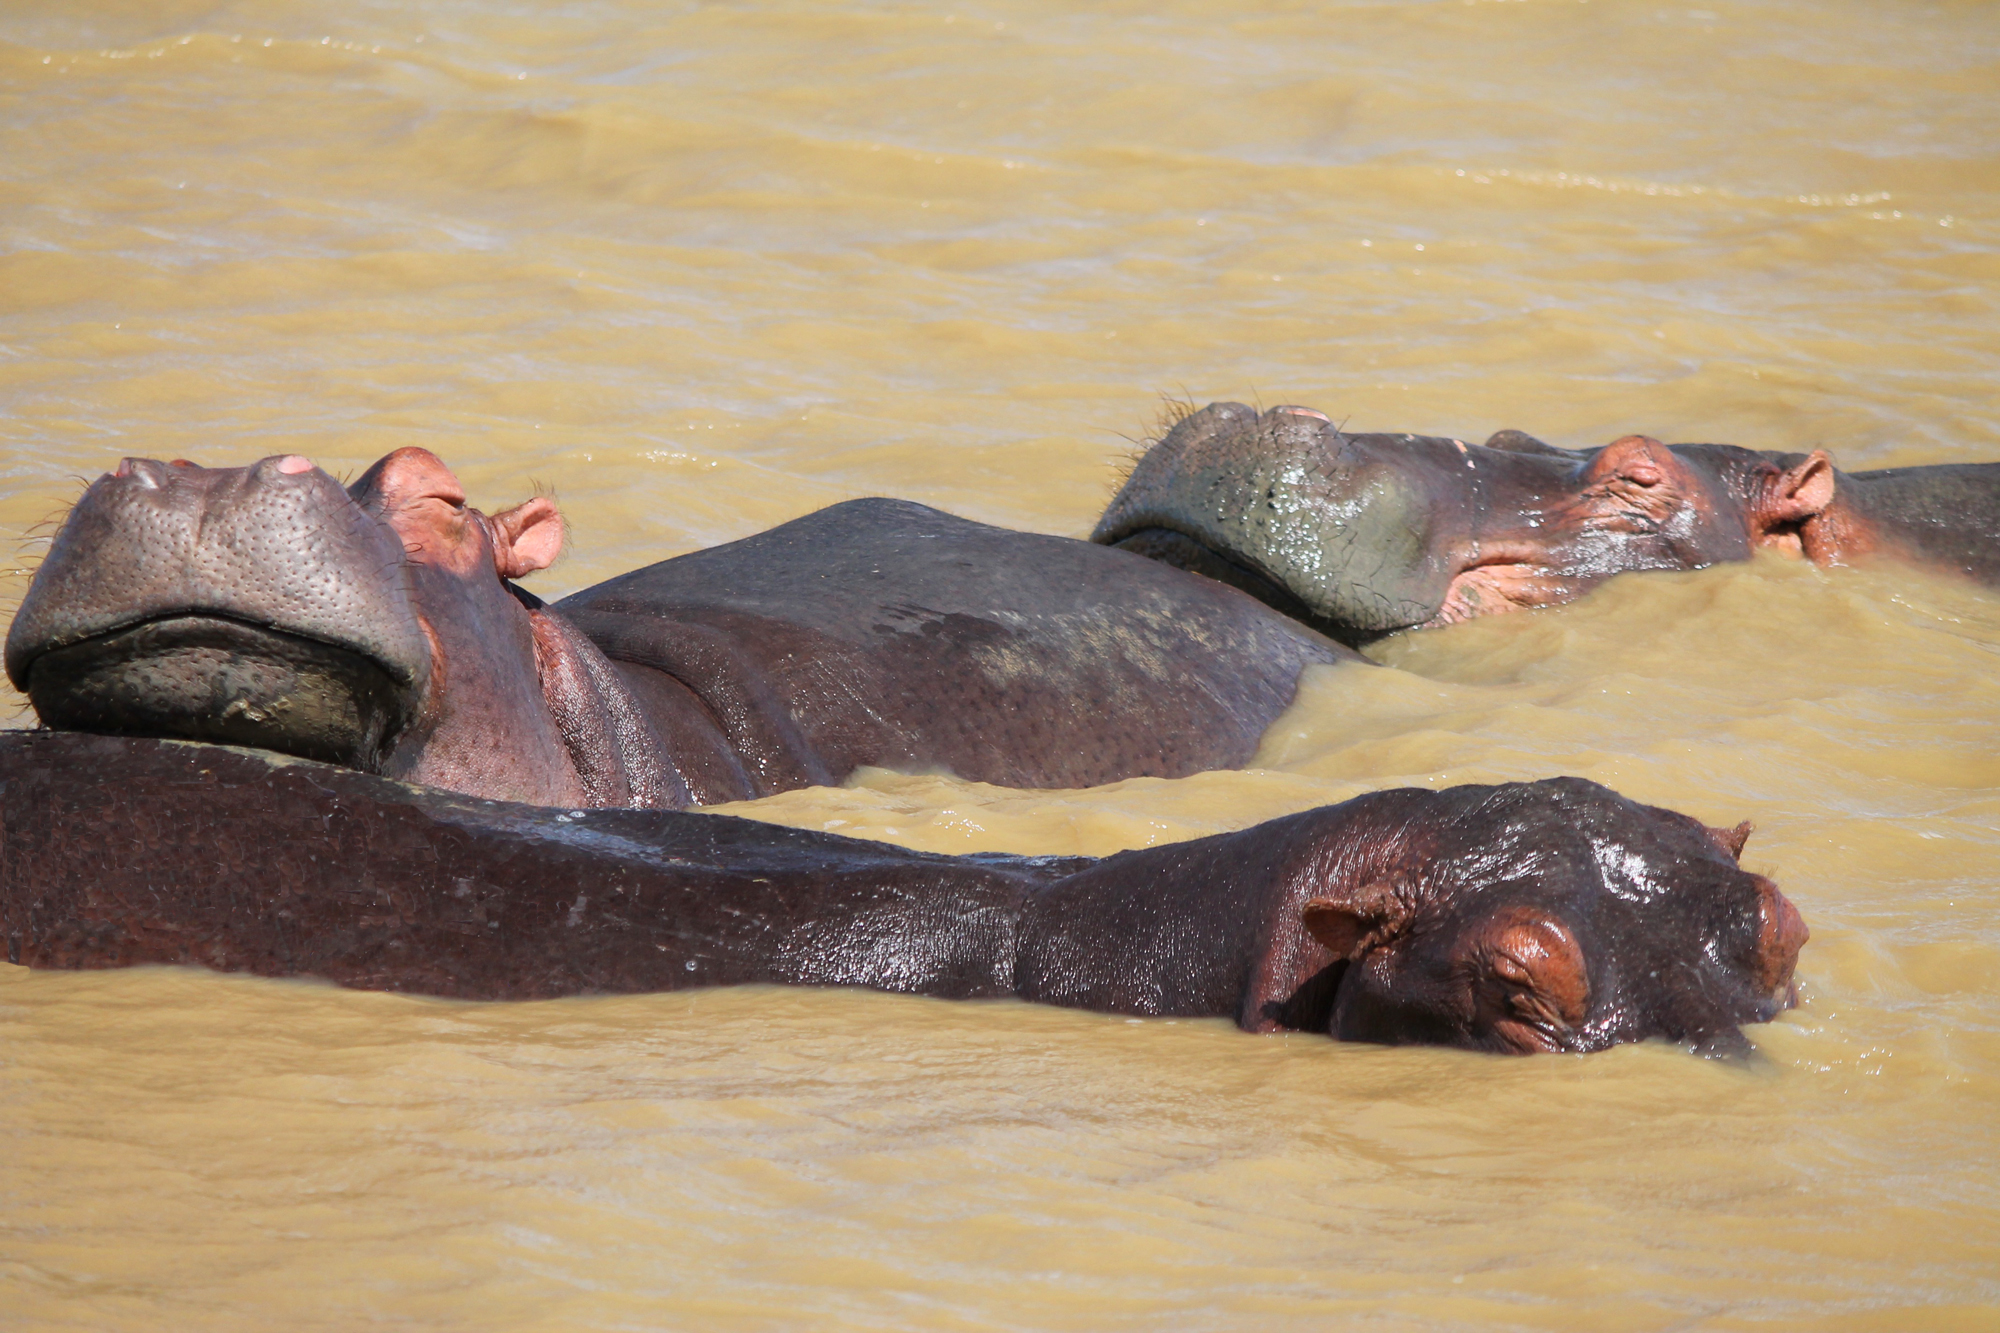  Hippos support each other from drowning while sleeping 